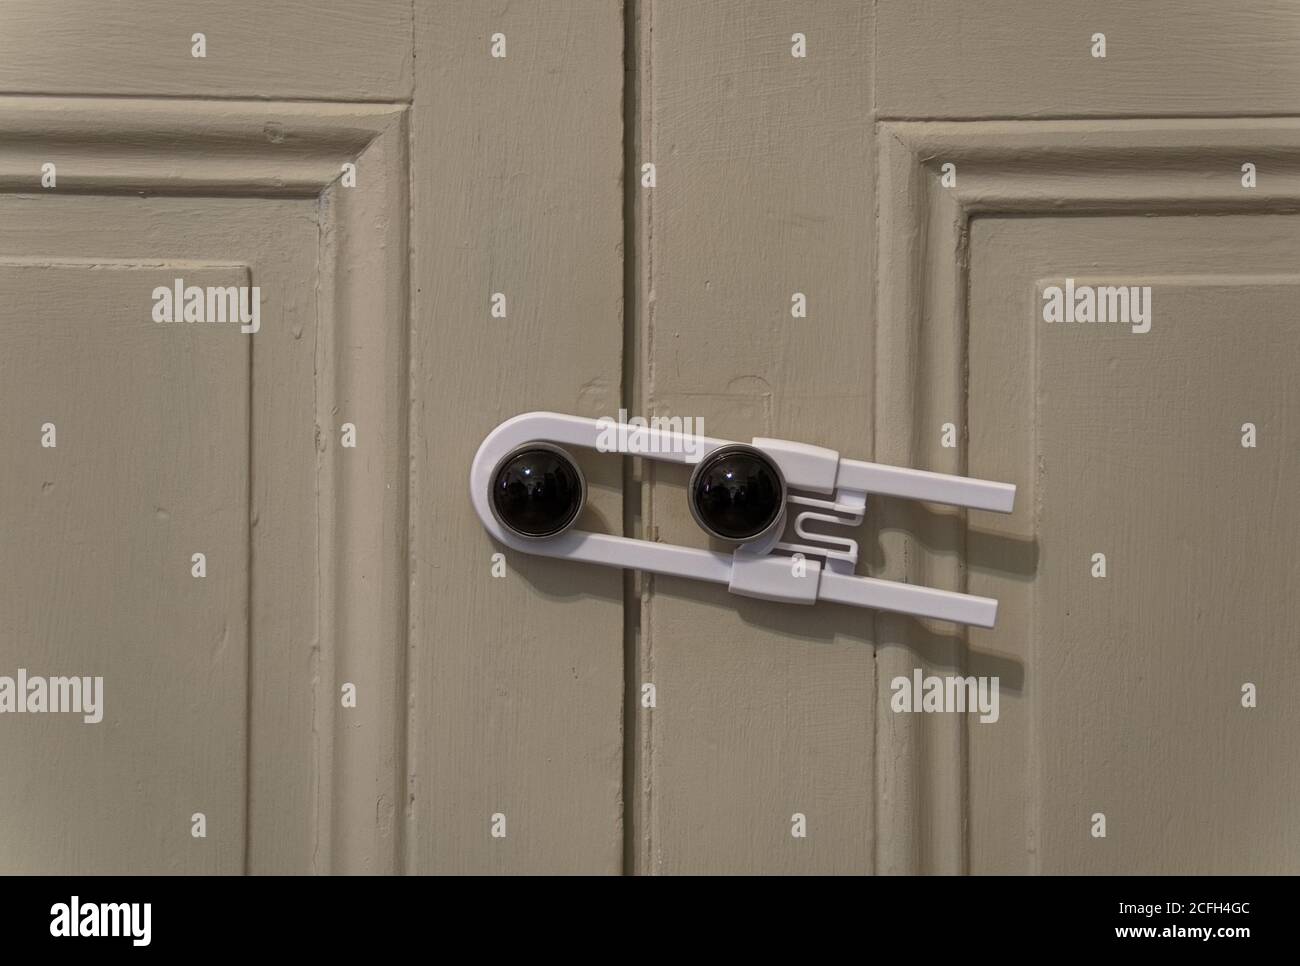 Close up view of a white child safety lock holding two cabinet doors together Stock Photo